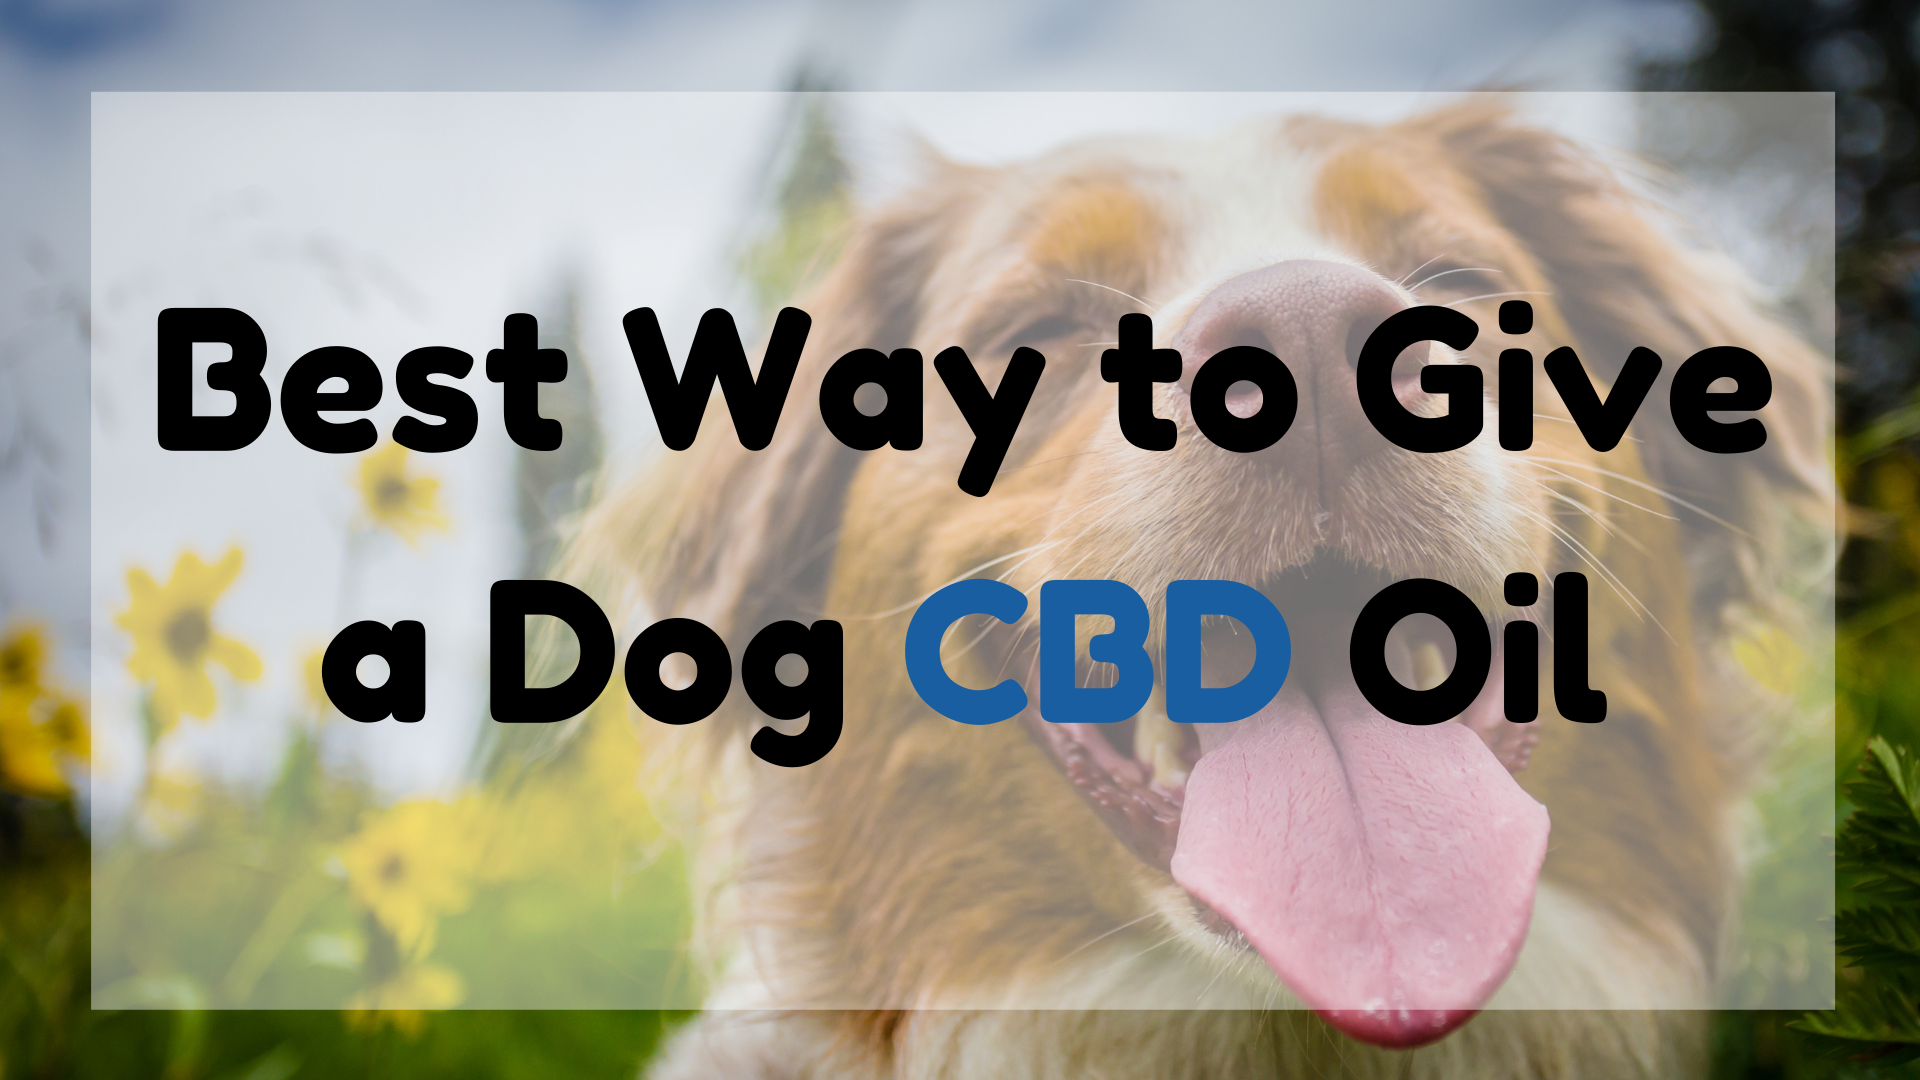 Best Way to Give a Dog CBD Oil